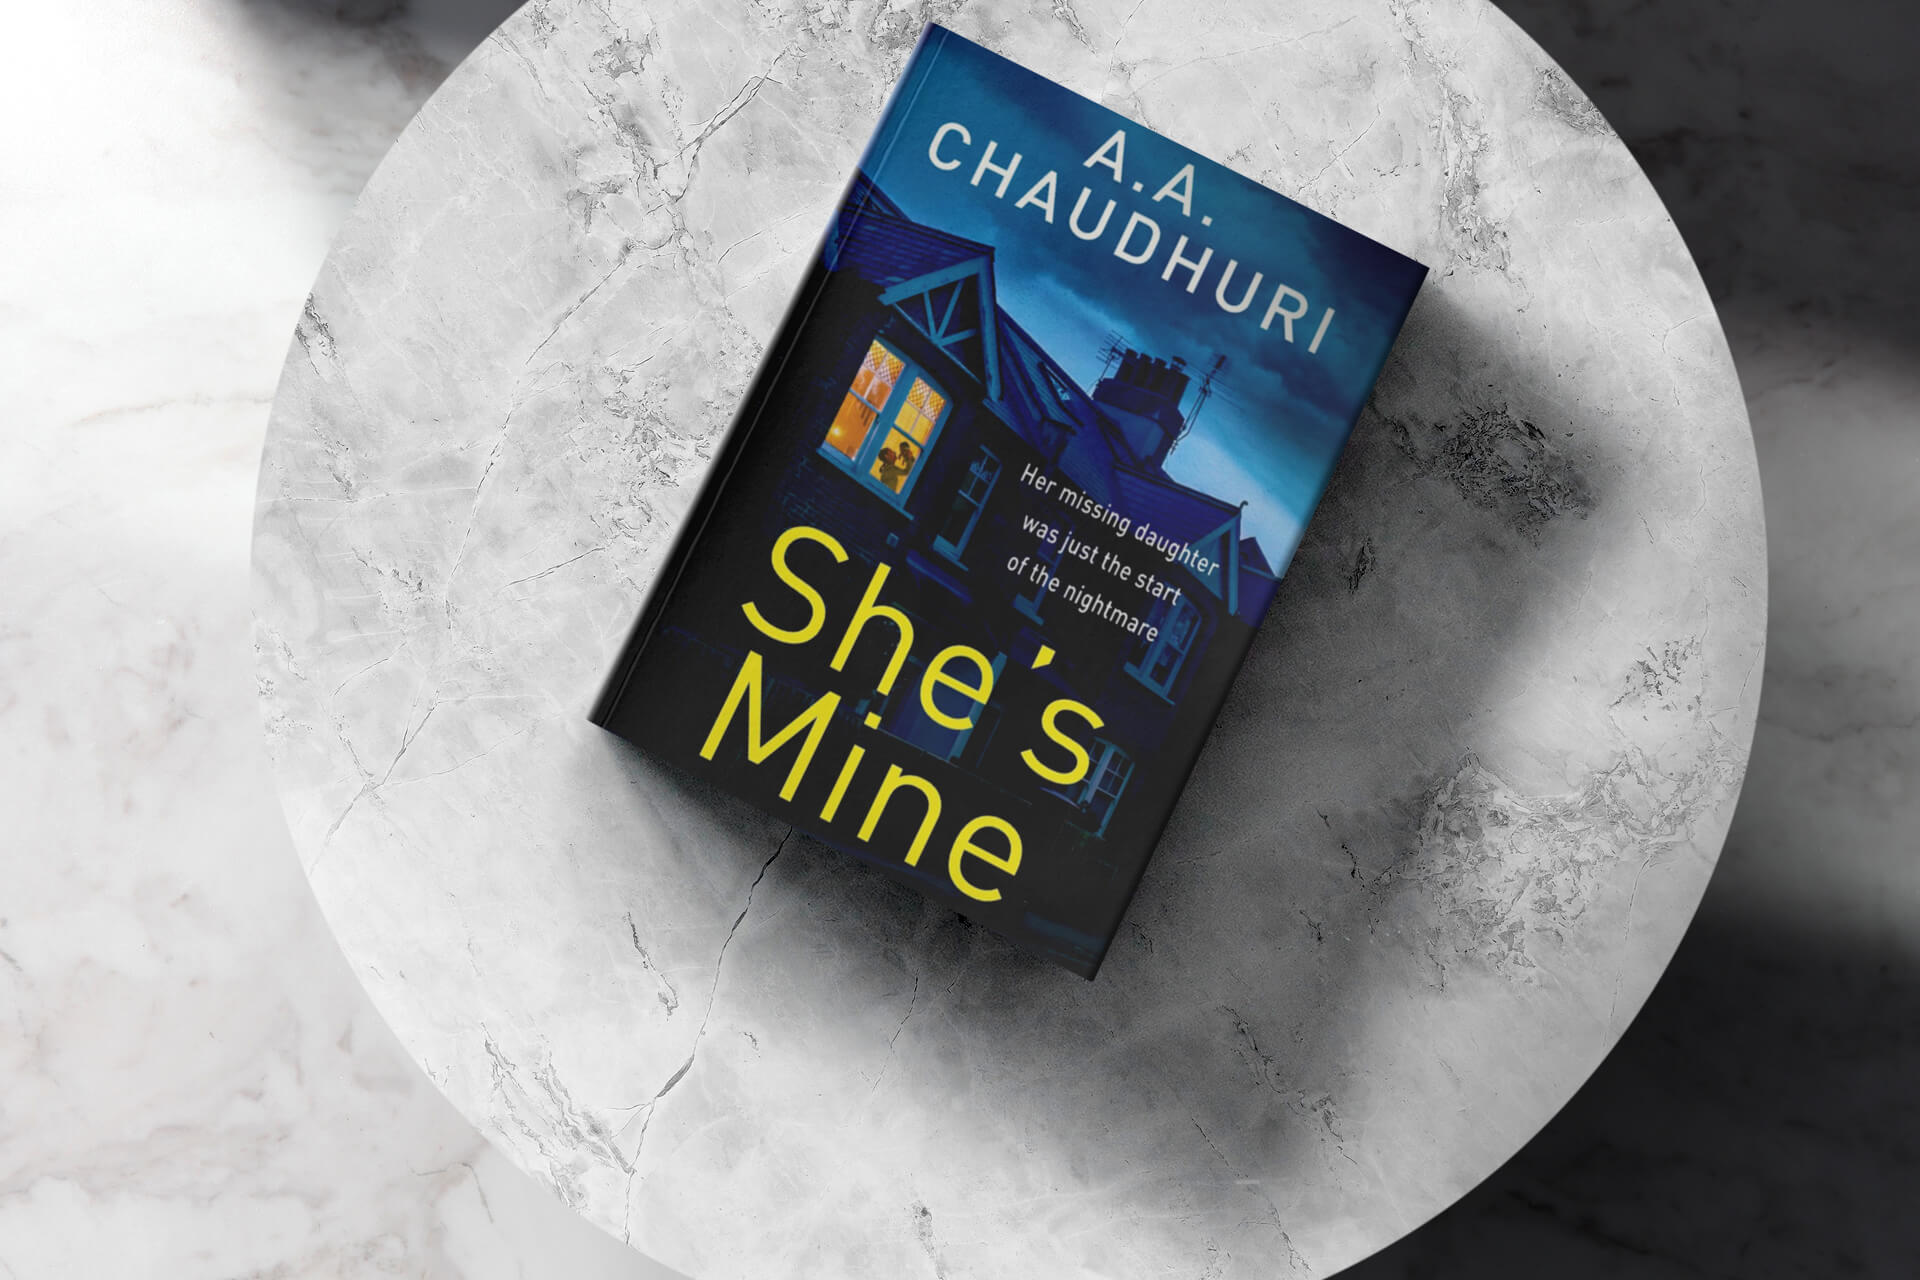 She's Mine - A.A. Chaudhuri Review